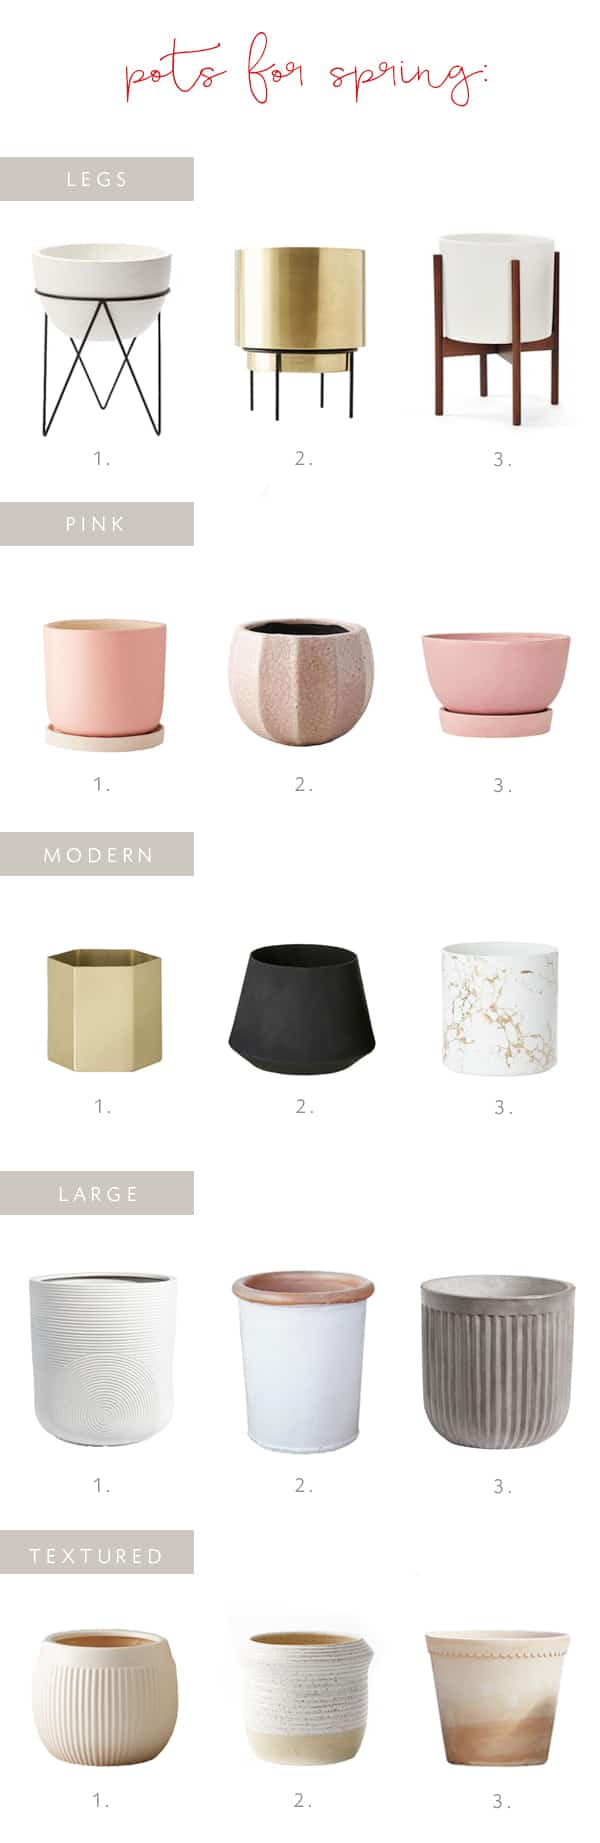 a roundup of pots for your spring houseplants! | coco kelley